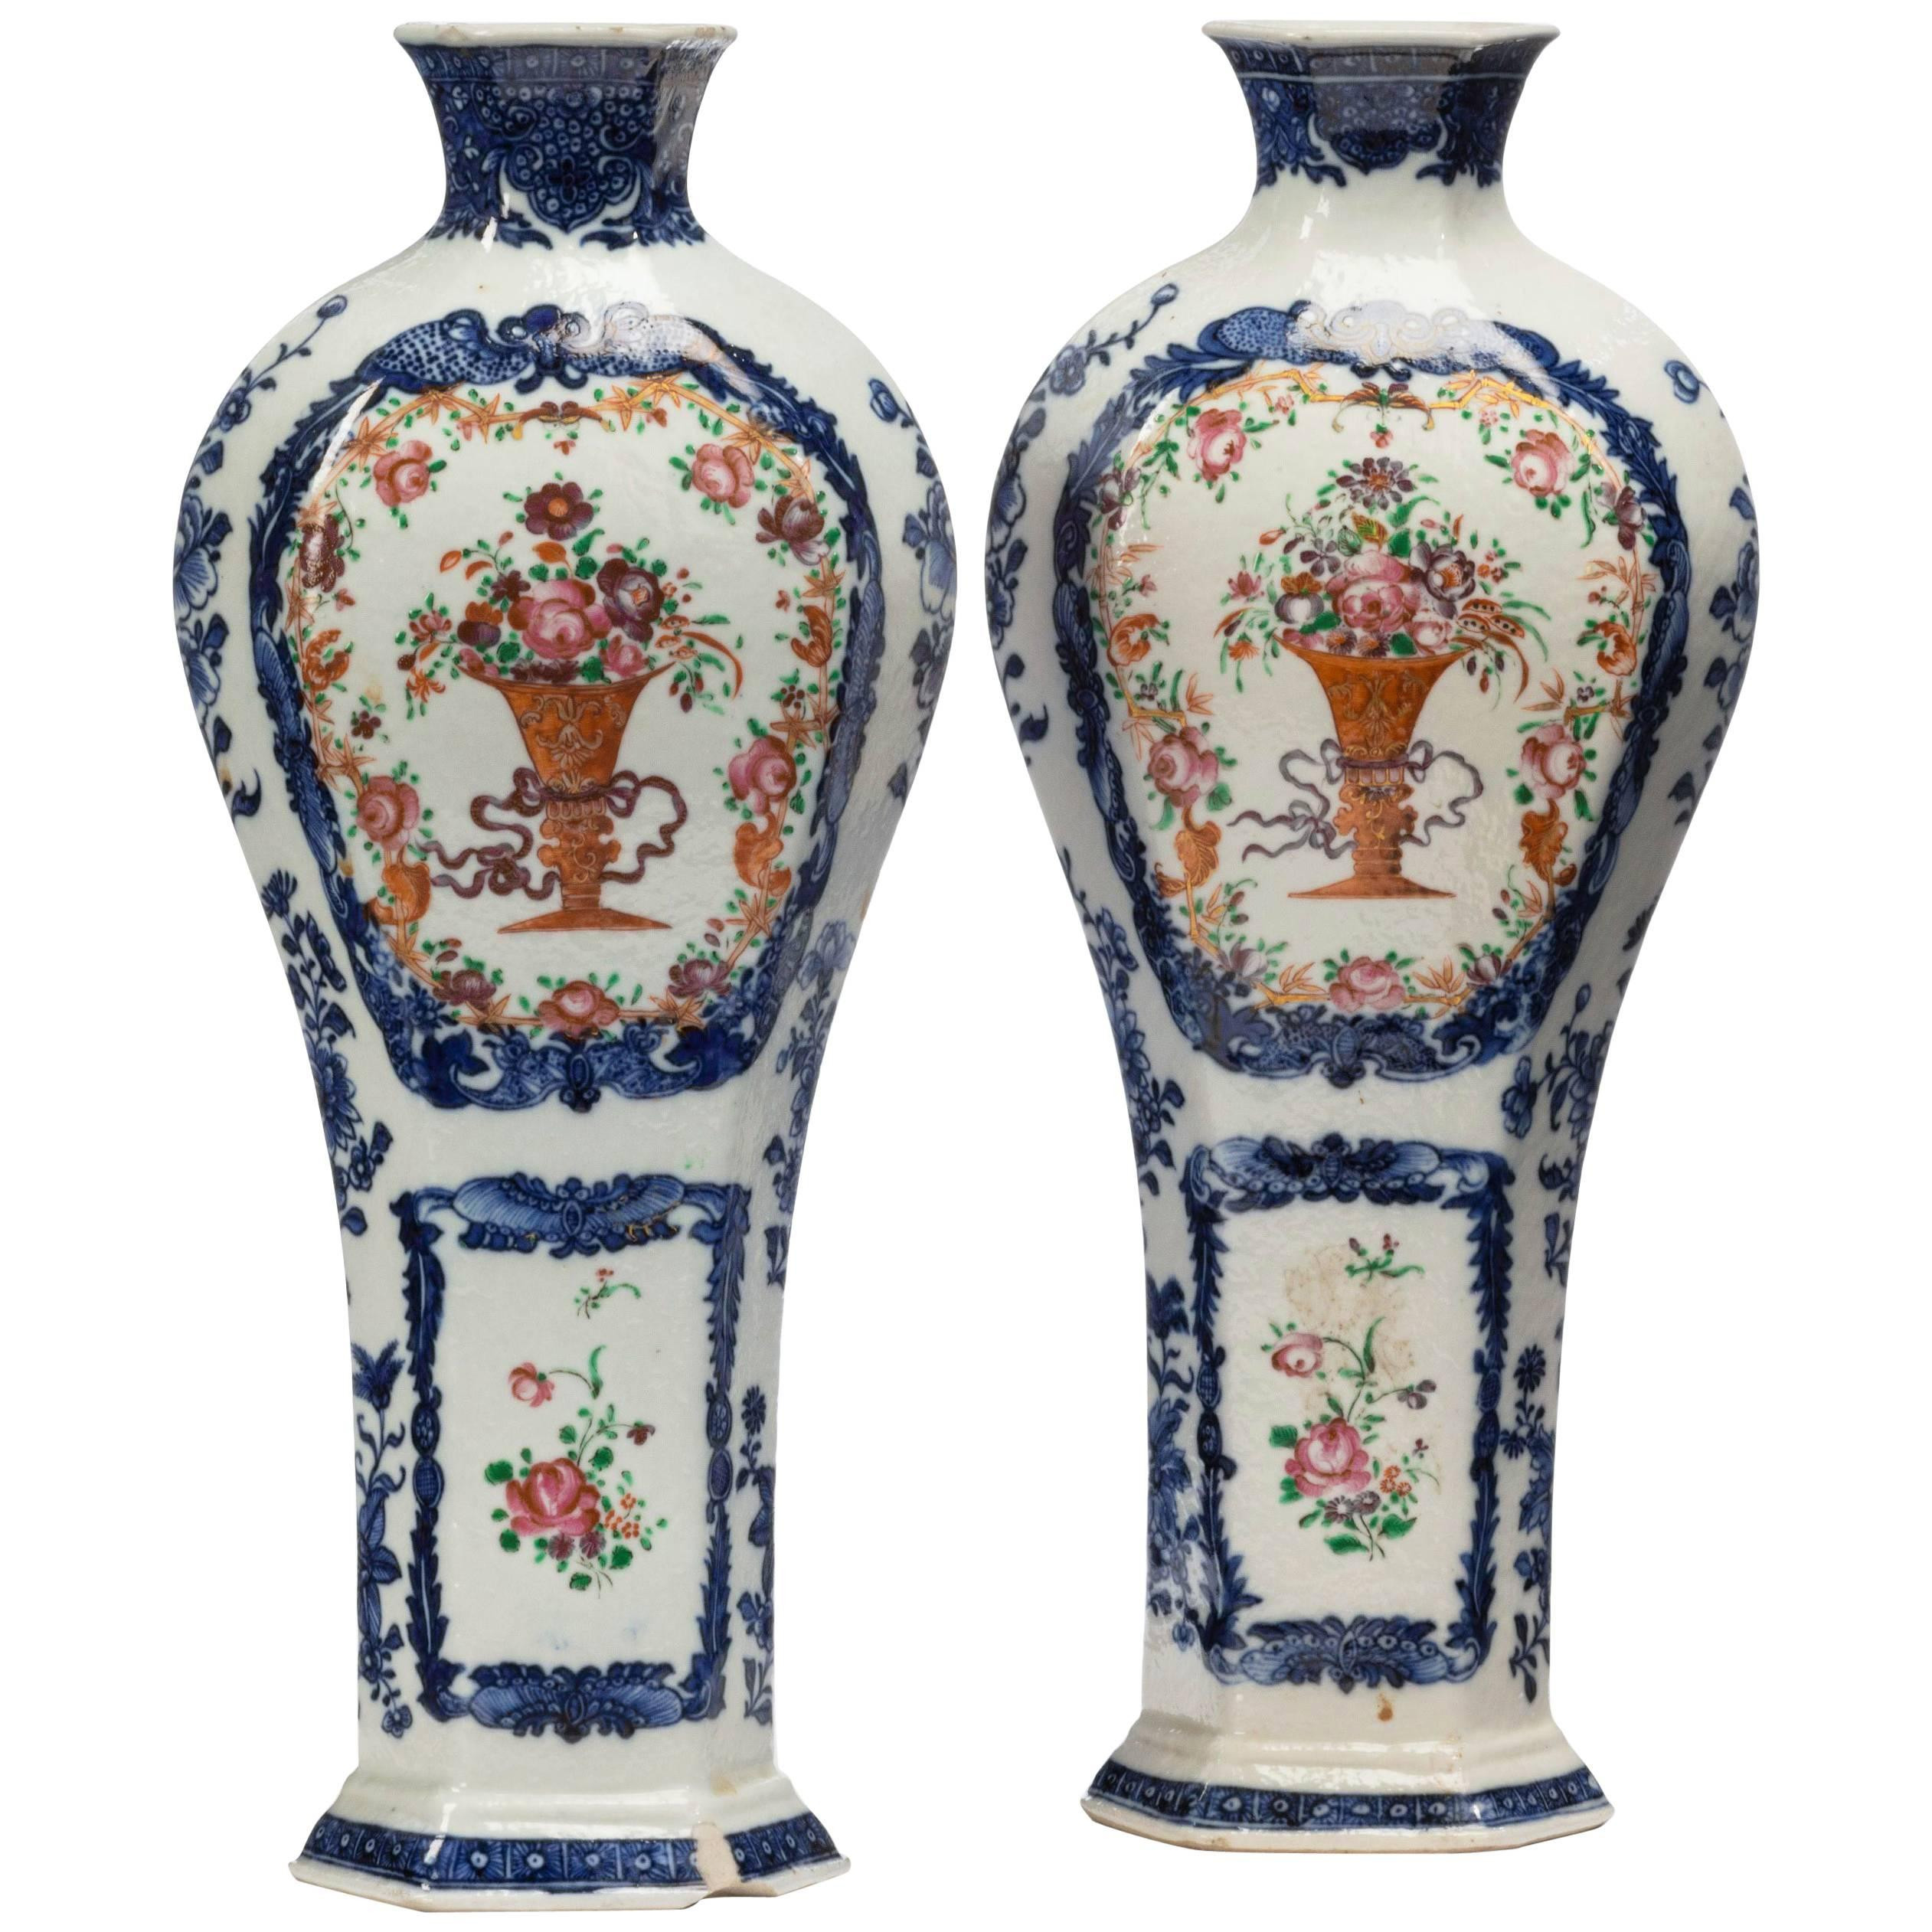 10 Trendy Blue and White Porcelain Vase 2024 free download blue and white porcelain vase of pair of qianlong period vases for sale at 1stdibs within 10738003 master